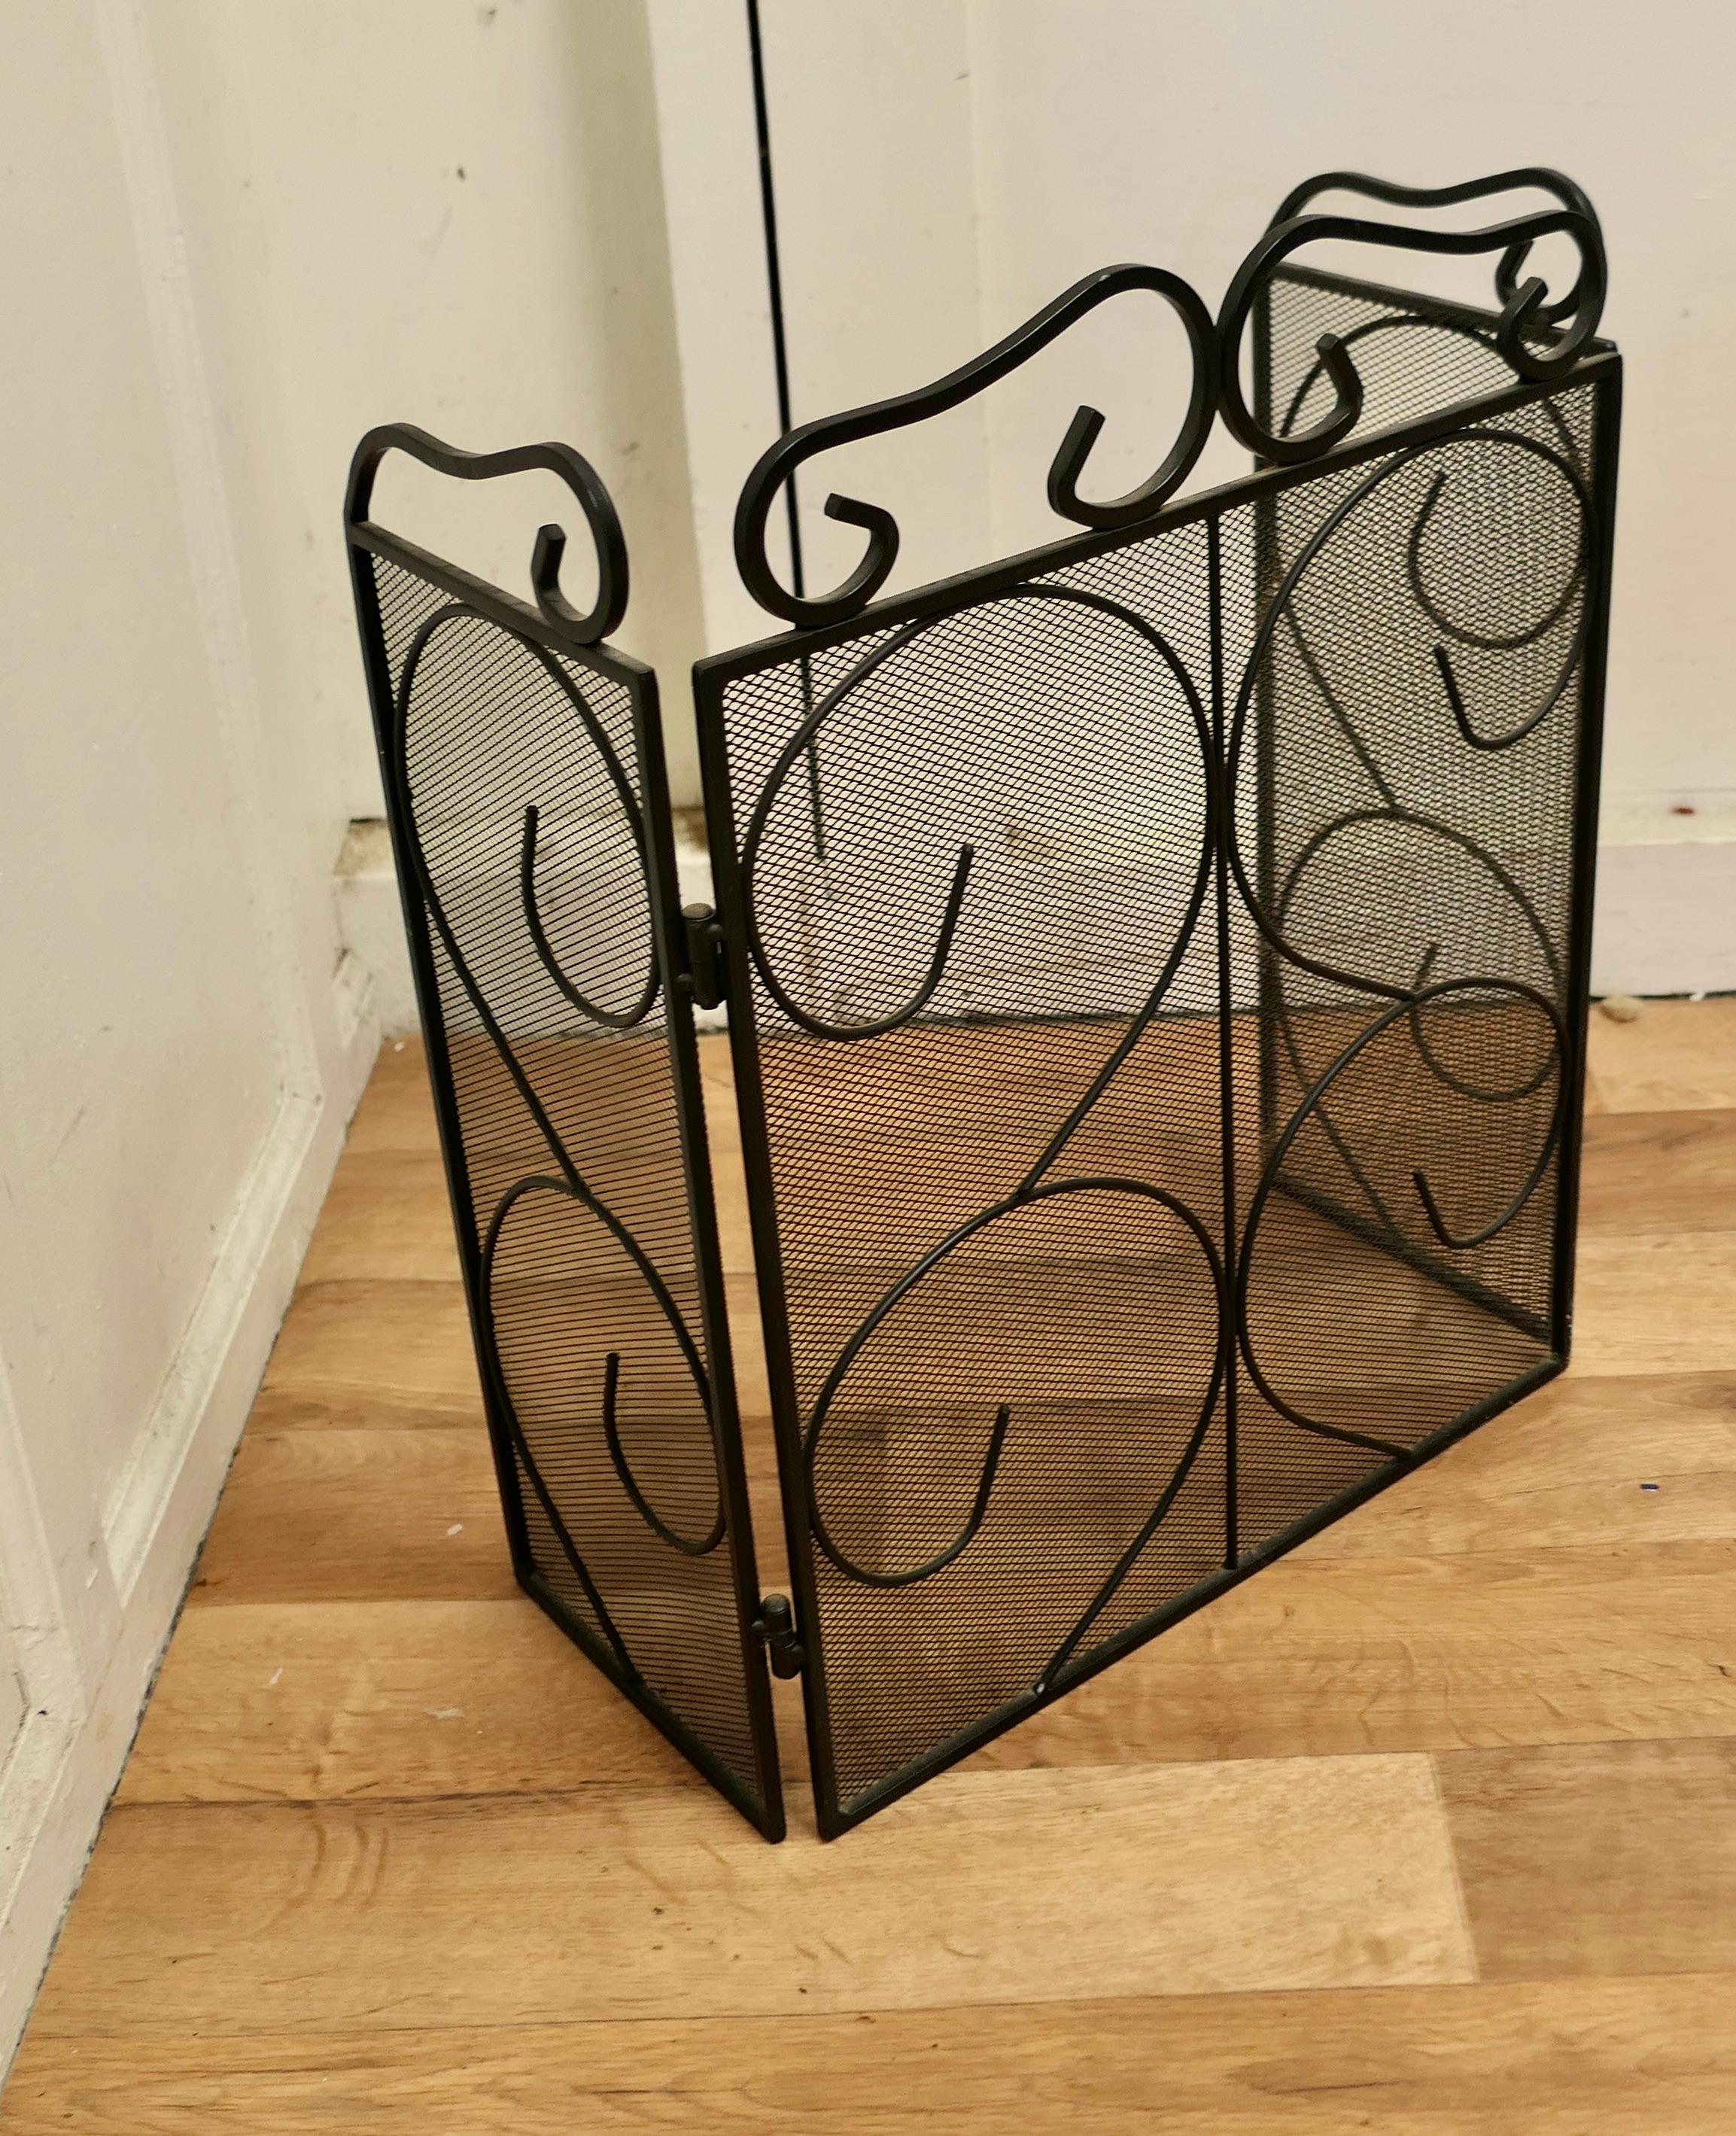 Folding Wrought Iron Fire Guard for Inglenook Fireplace In Good Condition For Sale In Chillerton, Isle of Wight